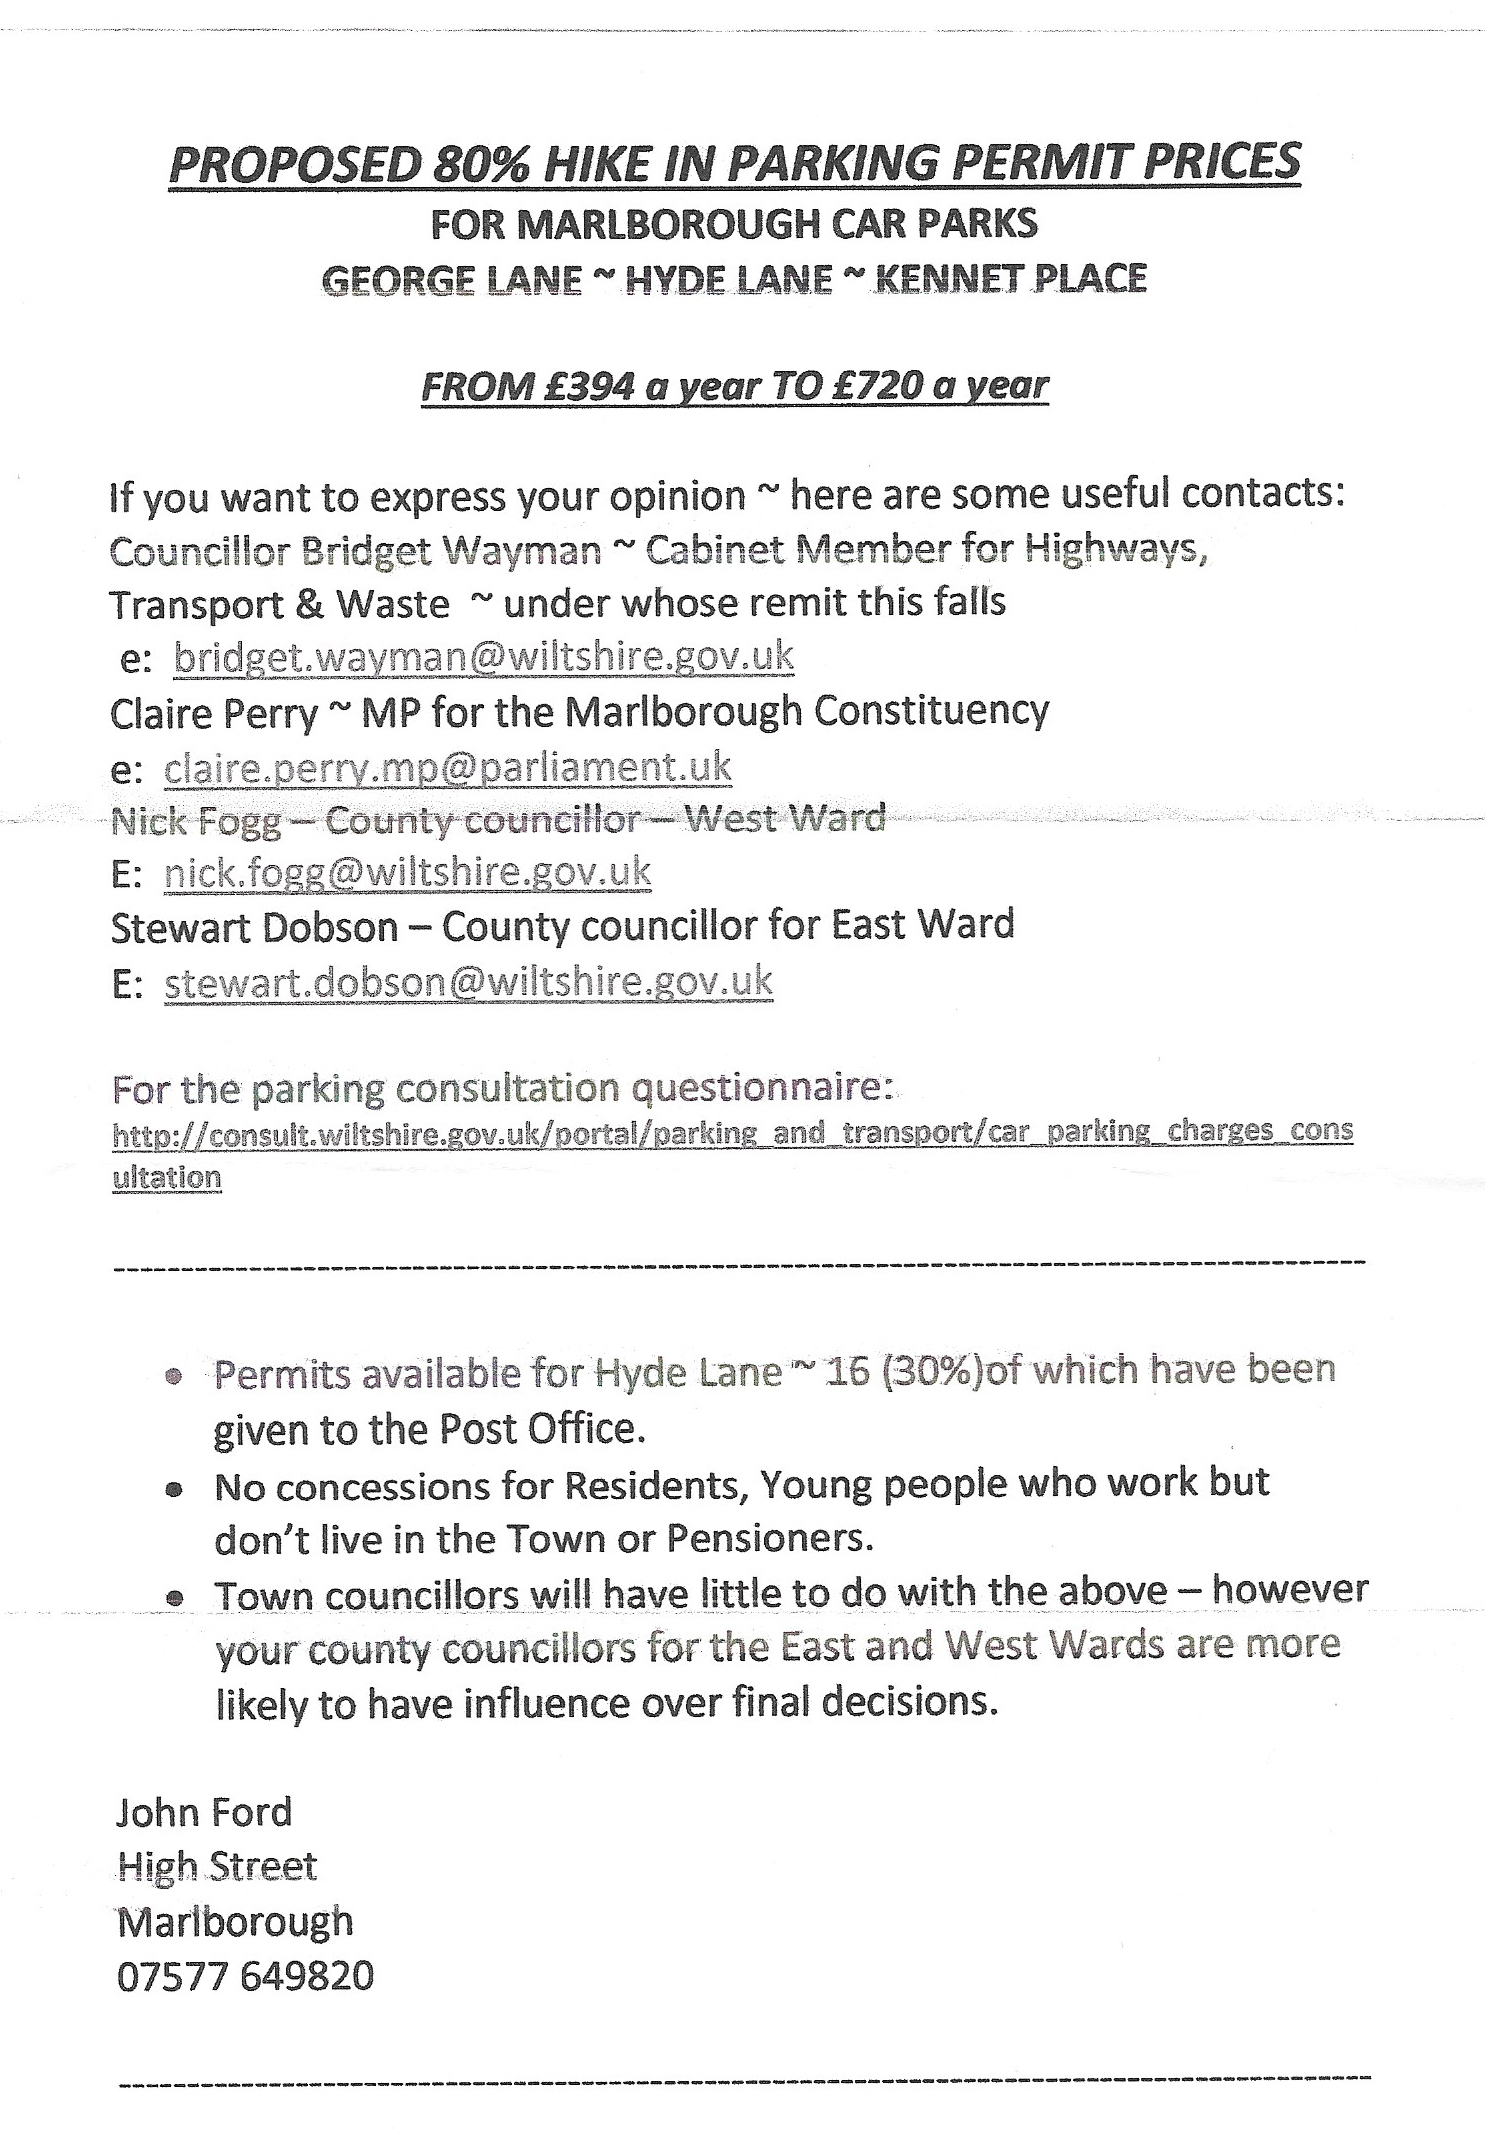 John Ford's handout re. WCC's Parking Cost Consultation